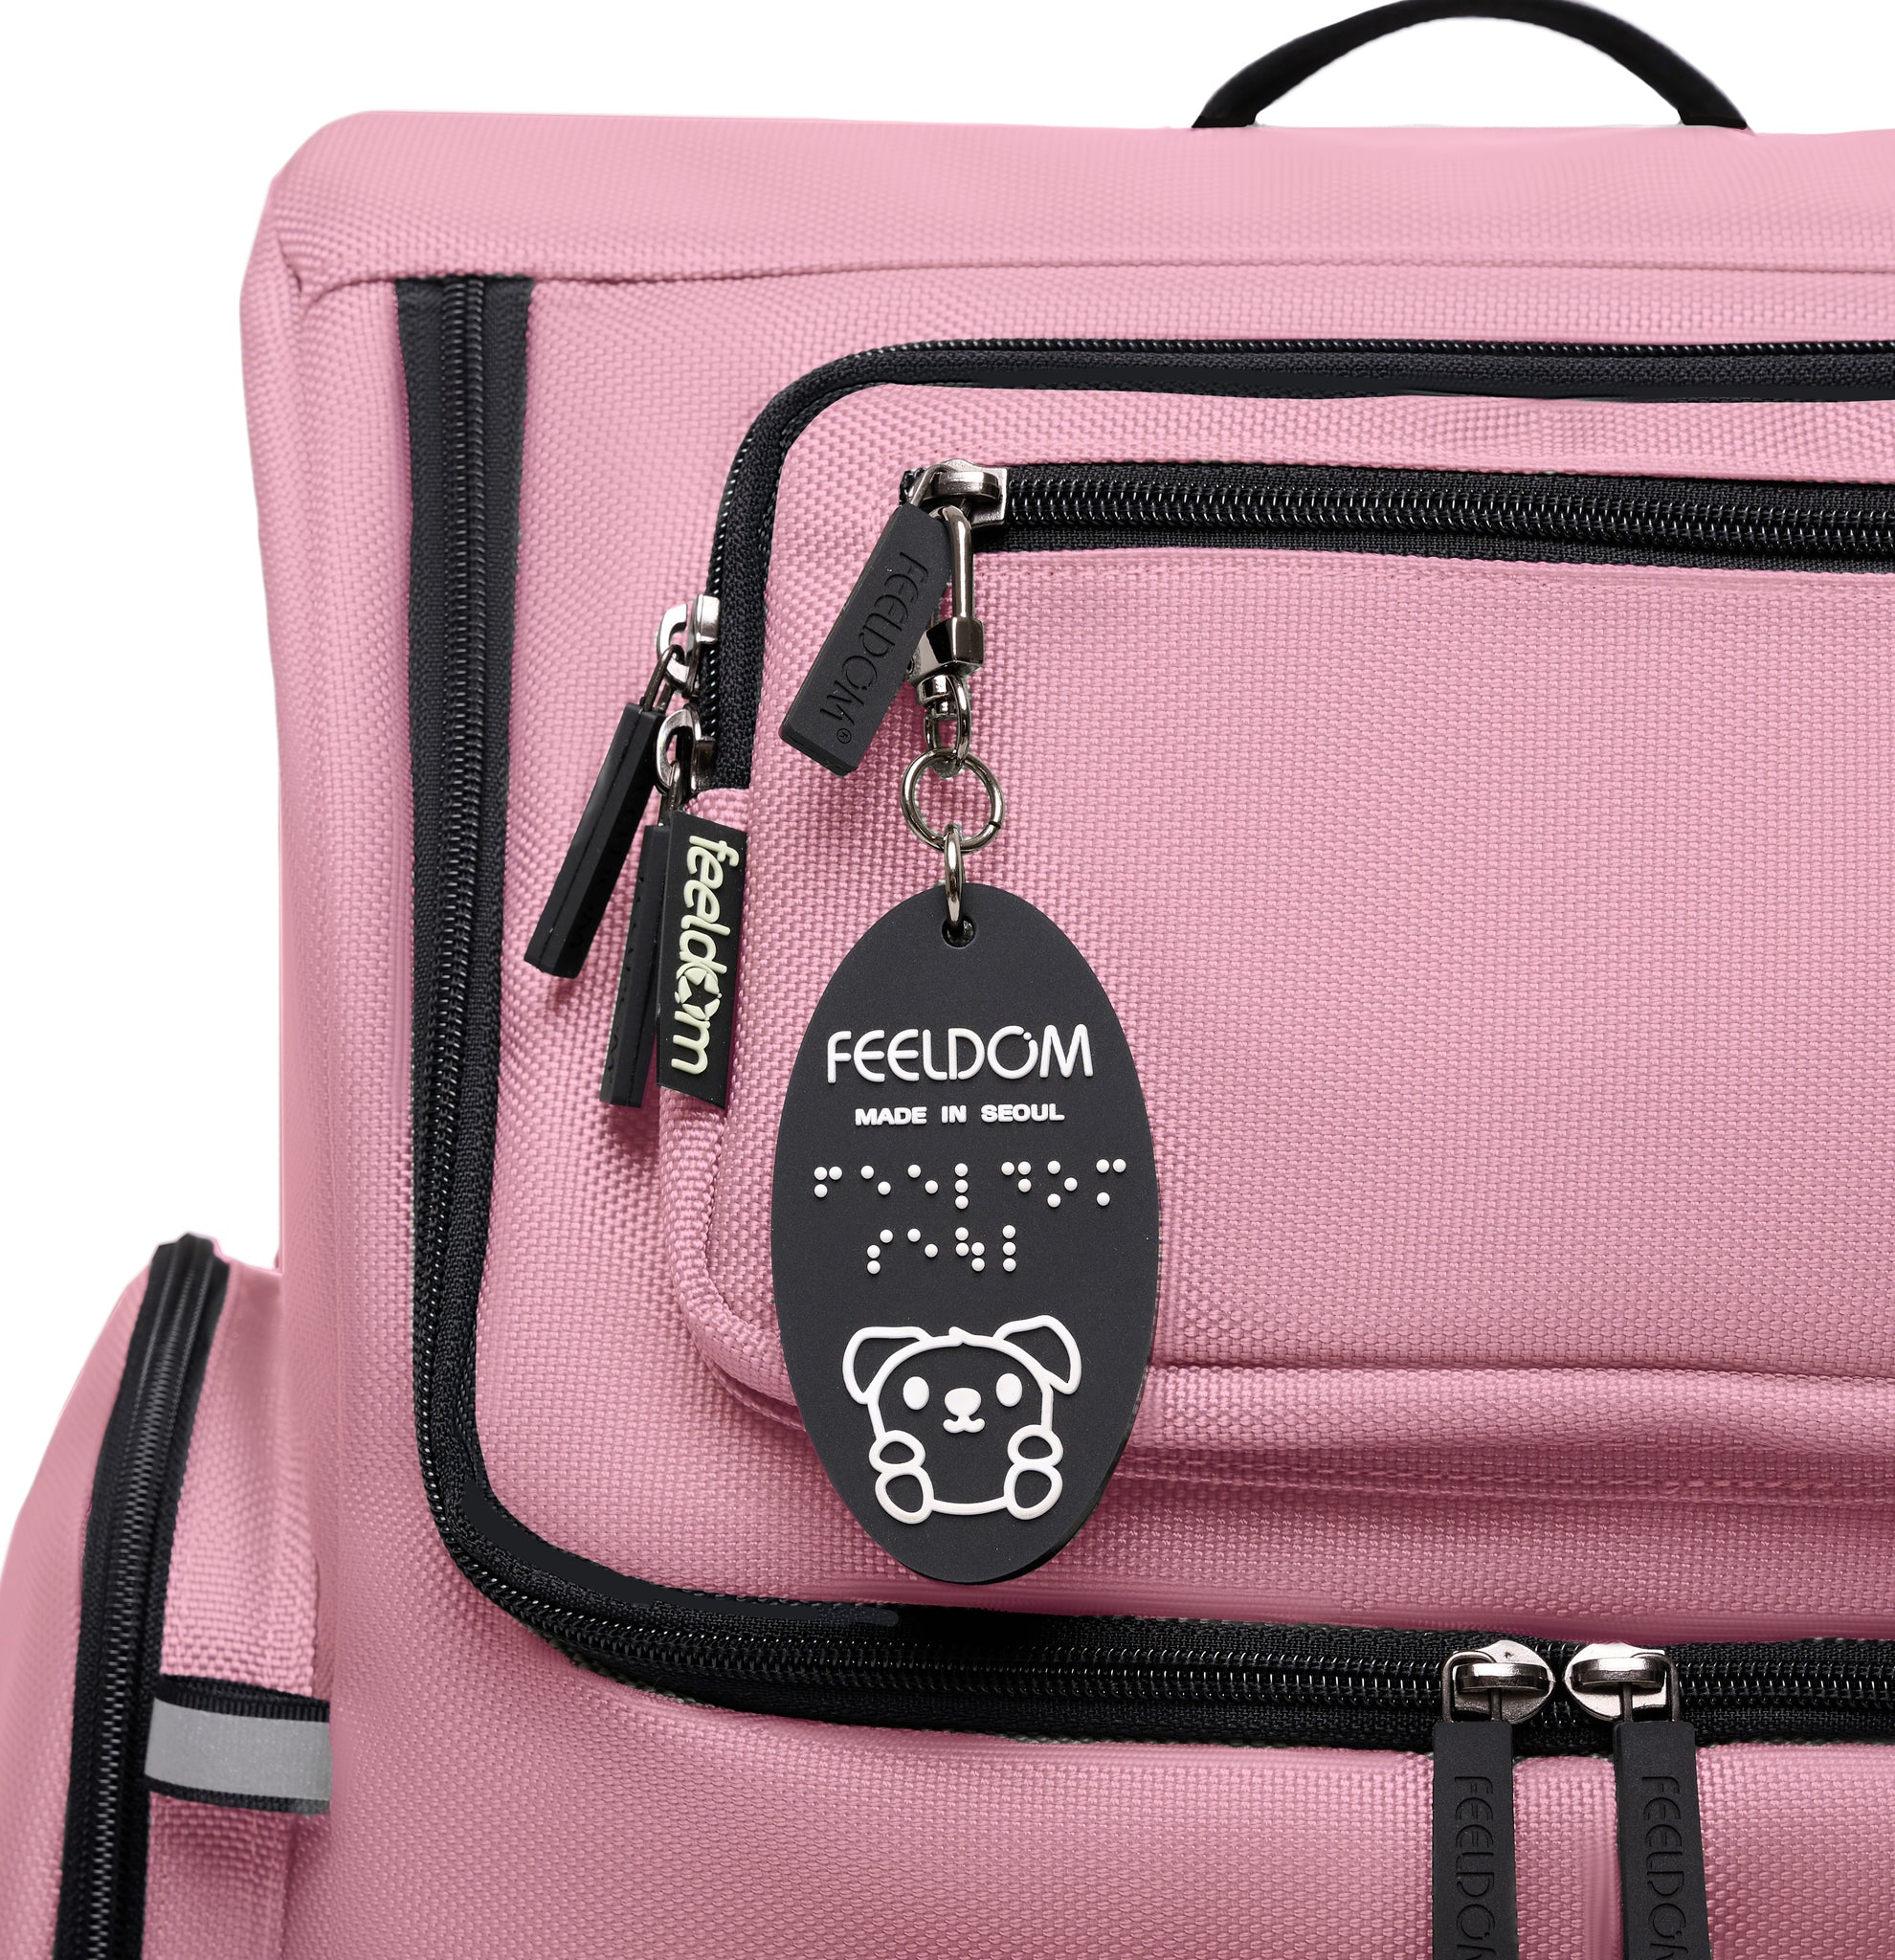 Star deluxe backpack in Rose Pink with black zippers and trim. Streamlined and contour design with Feeldom label and Goldie Braille Keychain.